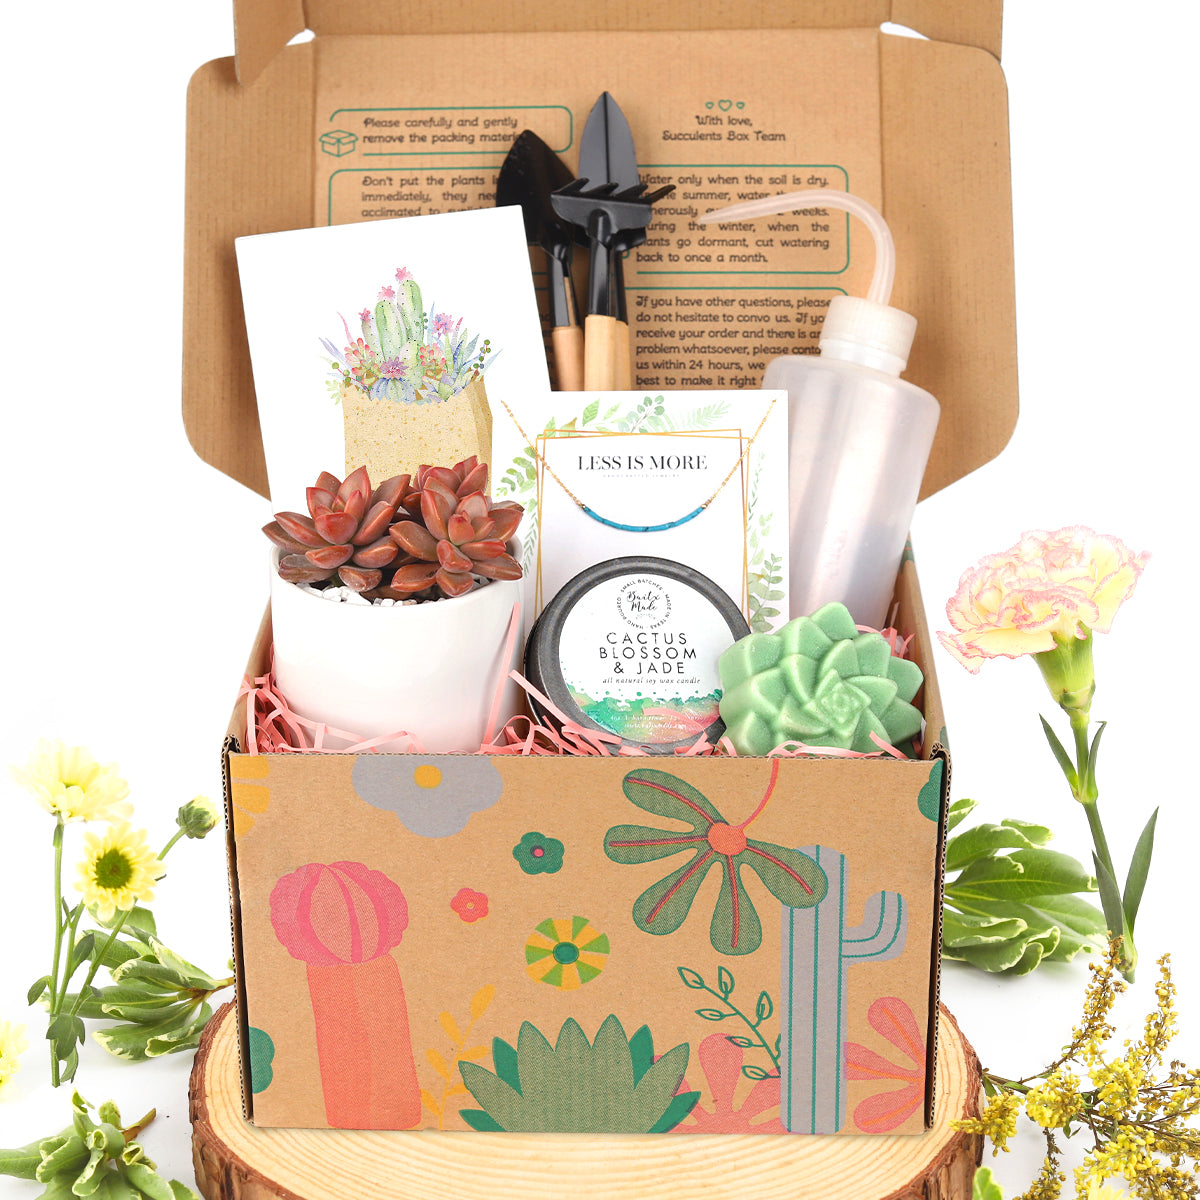 Premium Succulent Gift Box for sale, Mother's Day Gift Ideas, Buy Unique Plant Gift for Mom